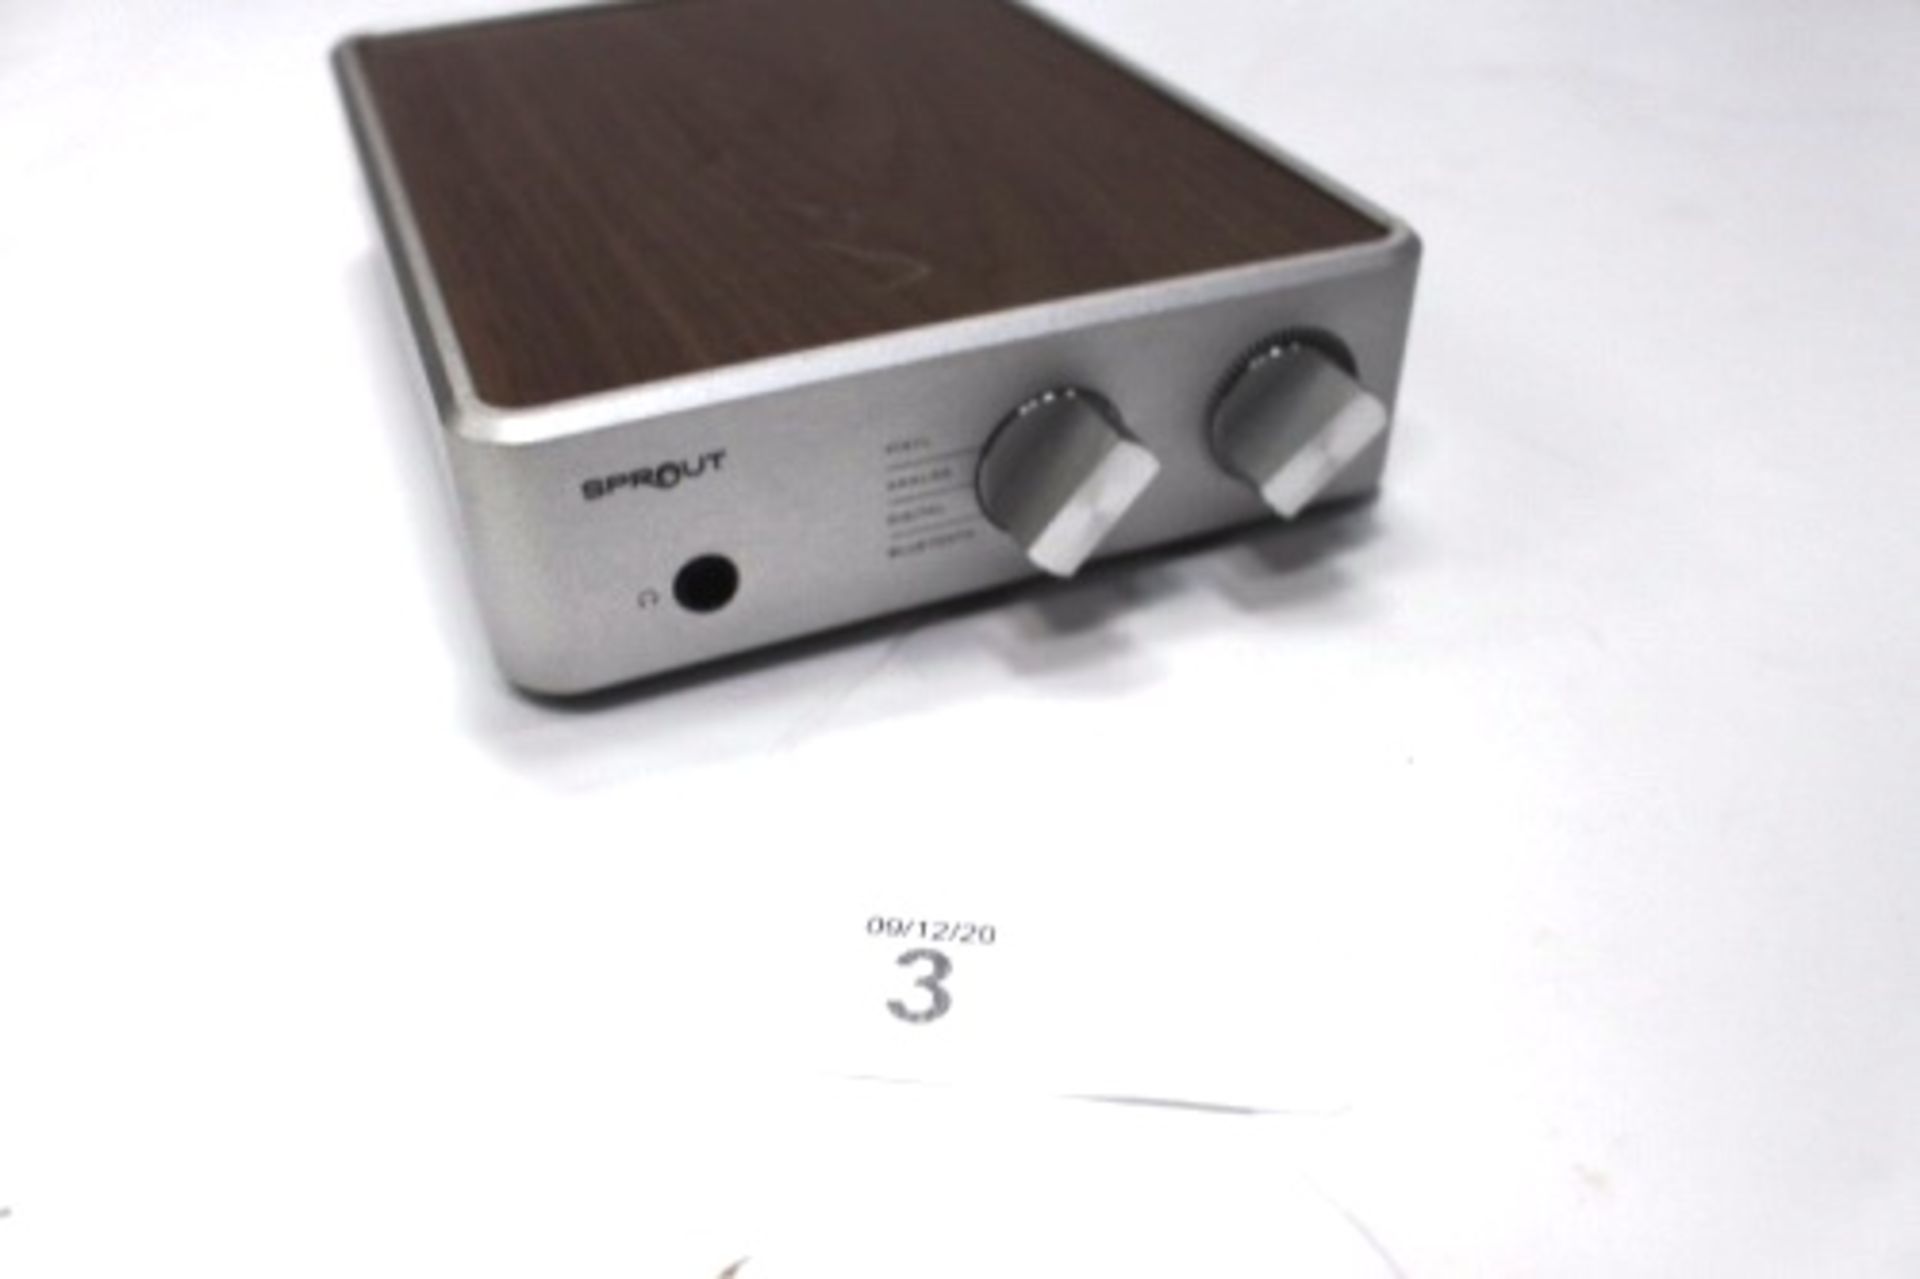 A P.S. Audio Sprout amplifier, no model number, powers on, speaker outputs working, not fully